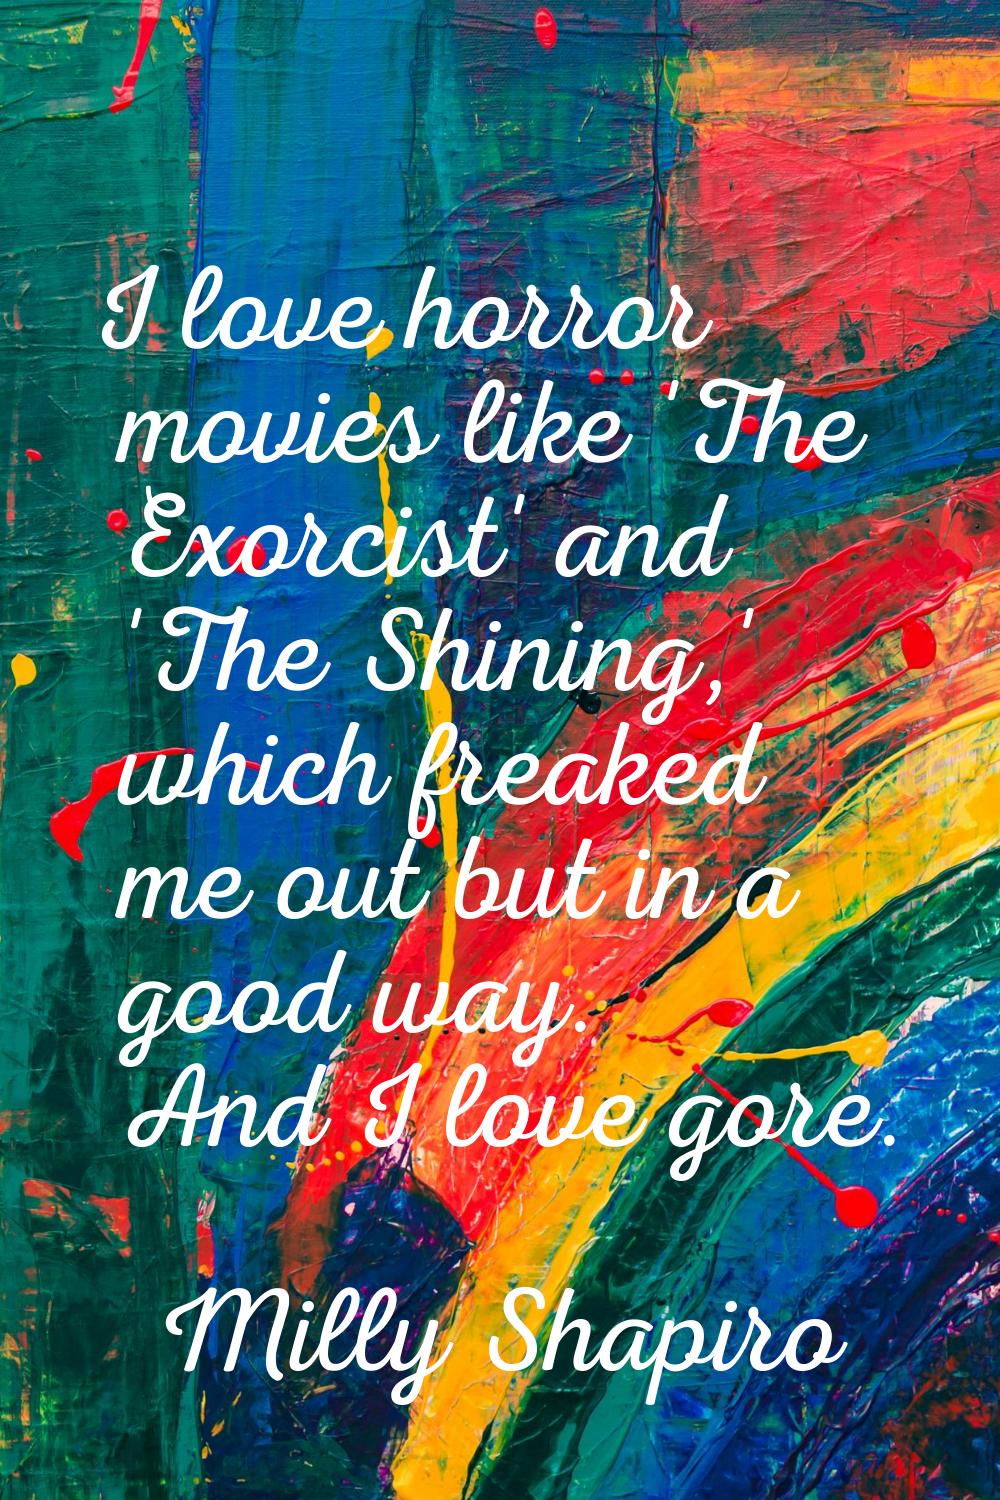 I love horror movies like 'The Exorcist' and 'The Shining,' which freaked me out but in a good way.